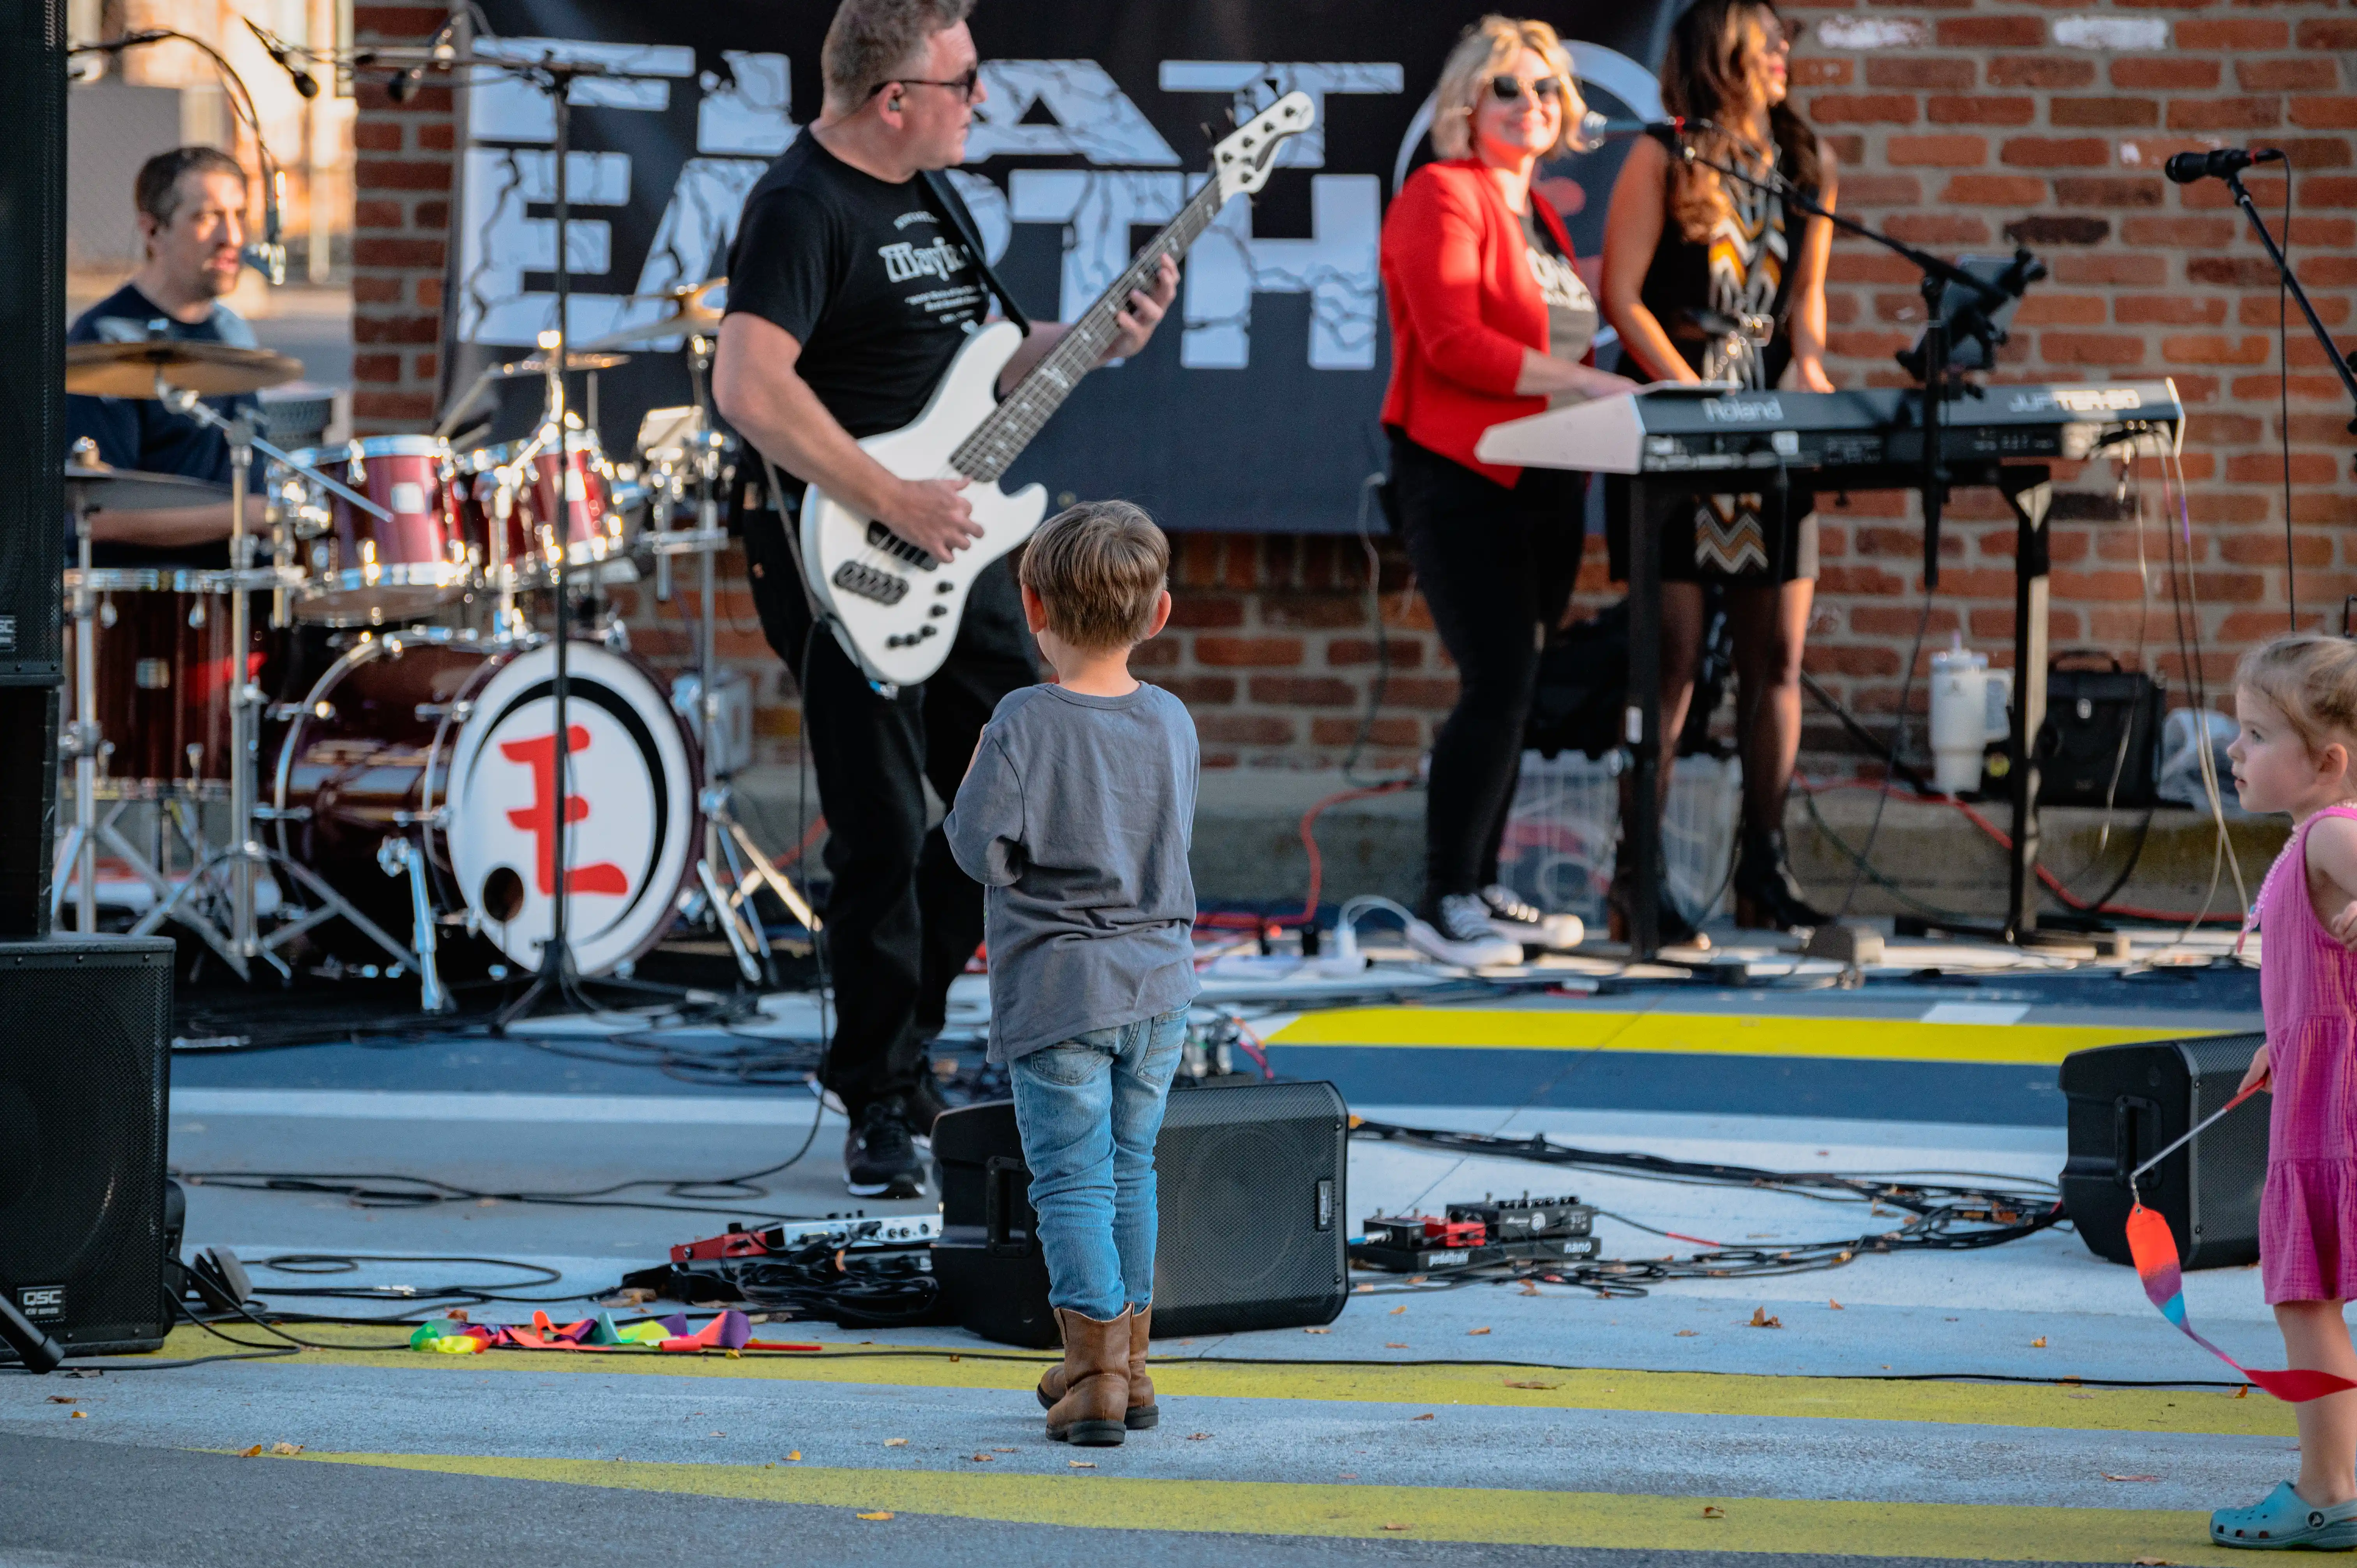 A live band performing on stage with a guitarist in the forefront and a child watching intently in the foreground.